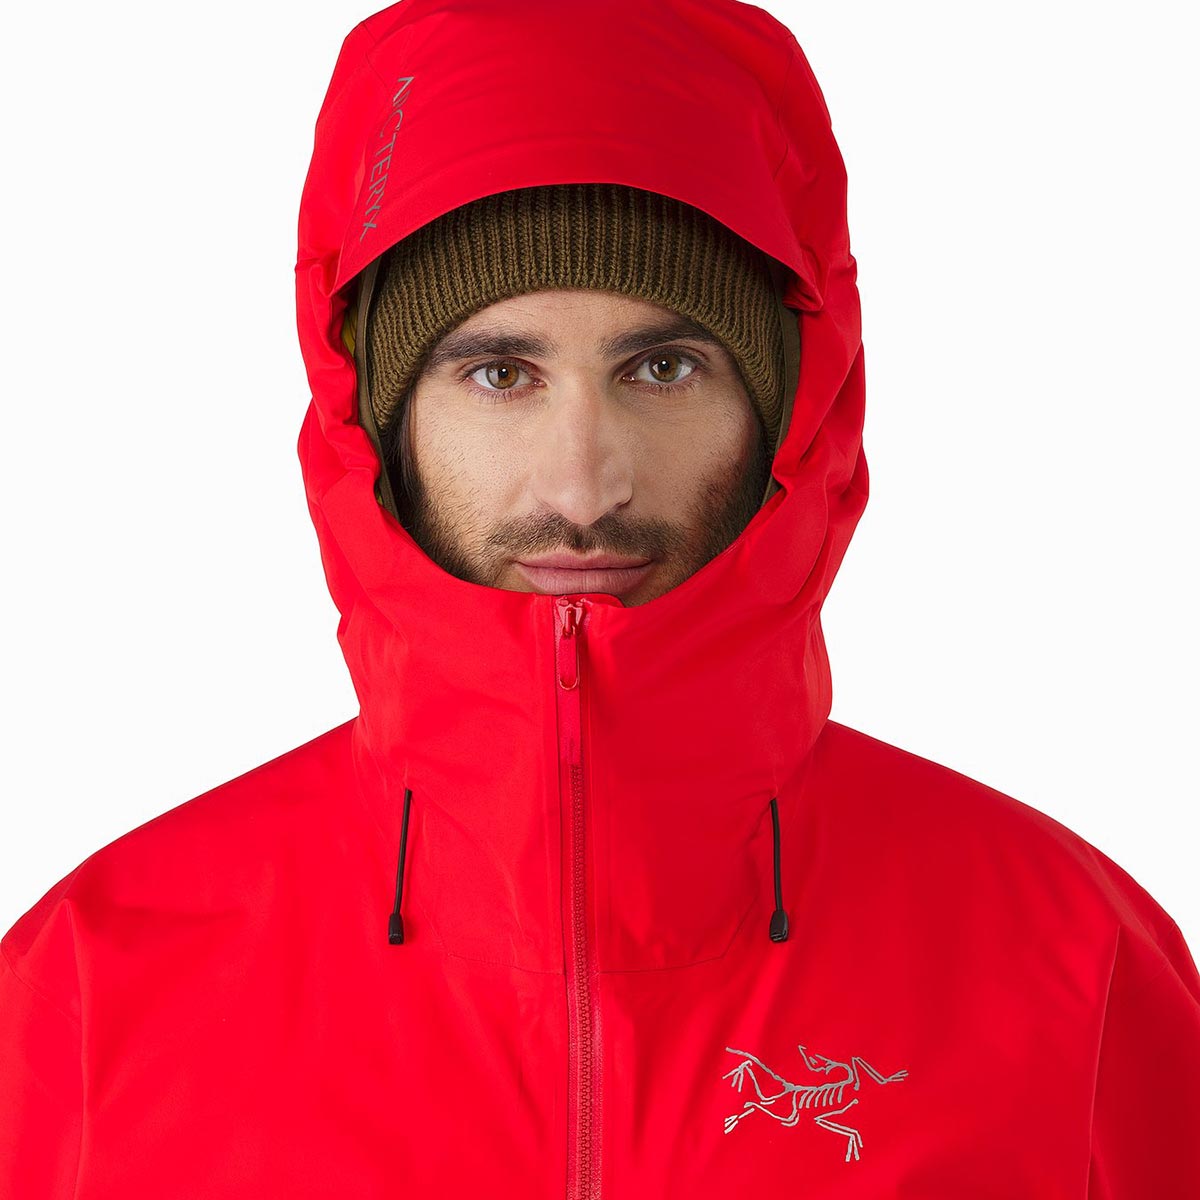 Arc'teryx Sphene Jacket, men's, Fall 2017 colors of discontinued model ...